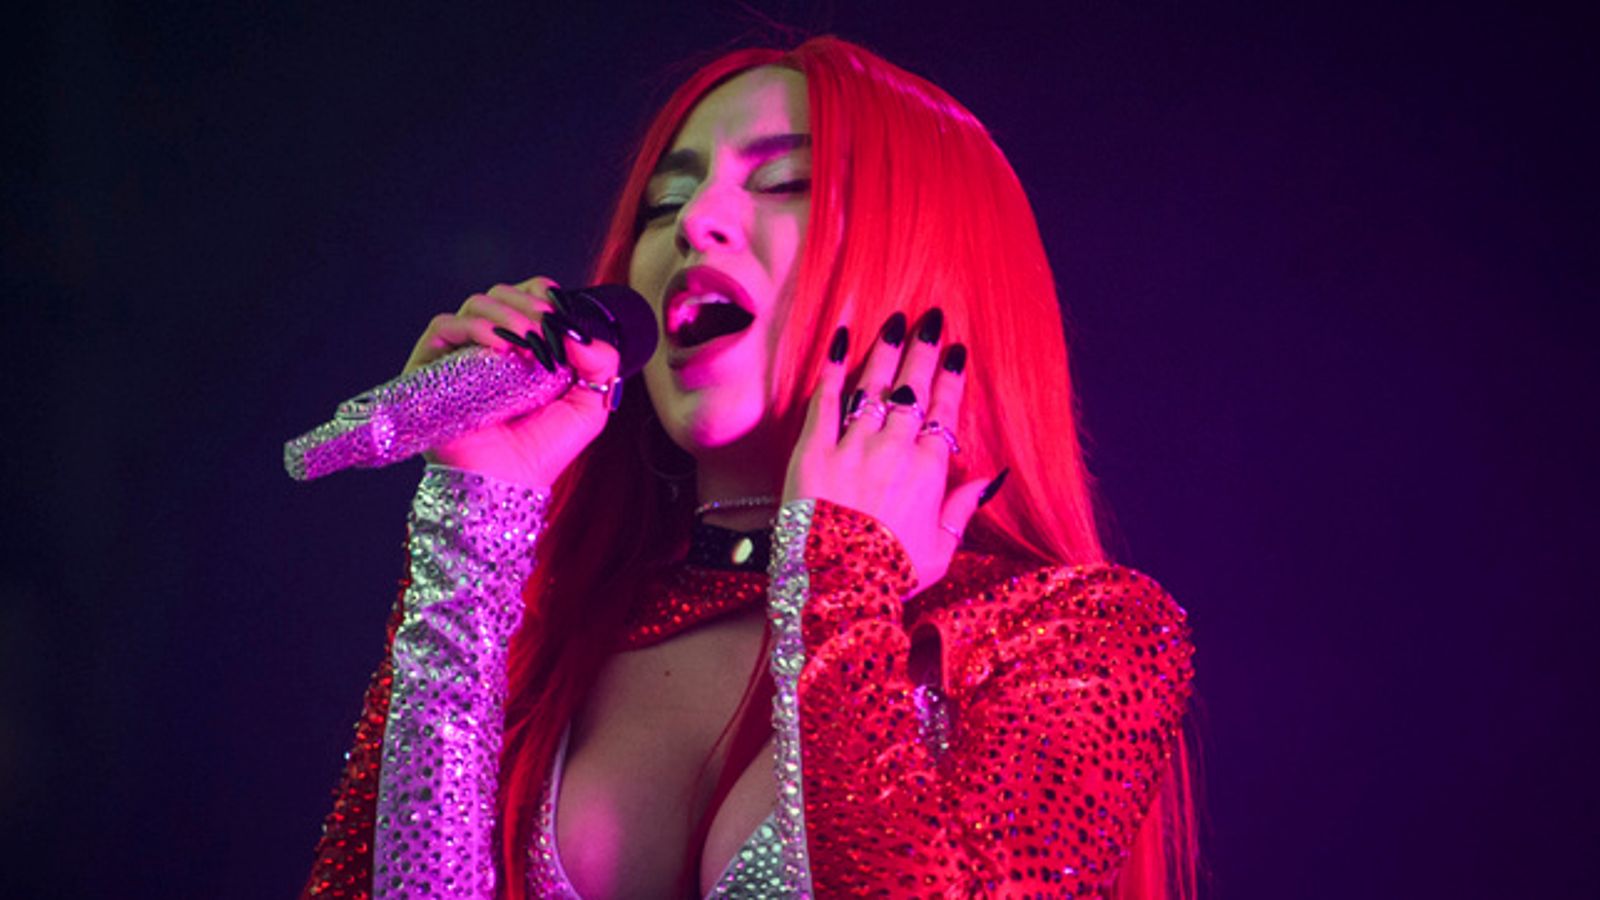 Ava Max slapped in face and scratched in the eye by man who runs on stage during her LA show